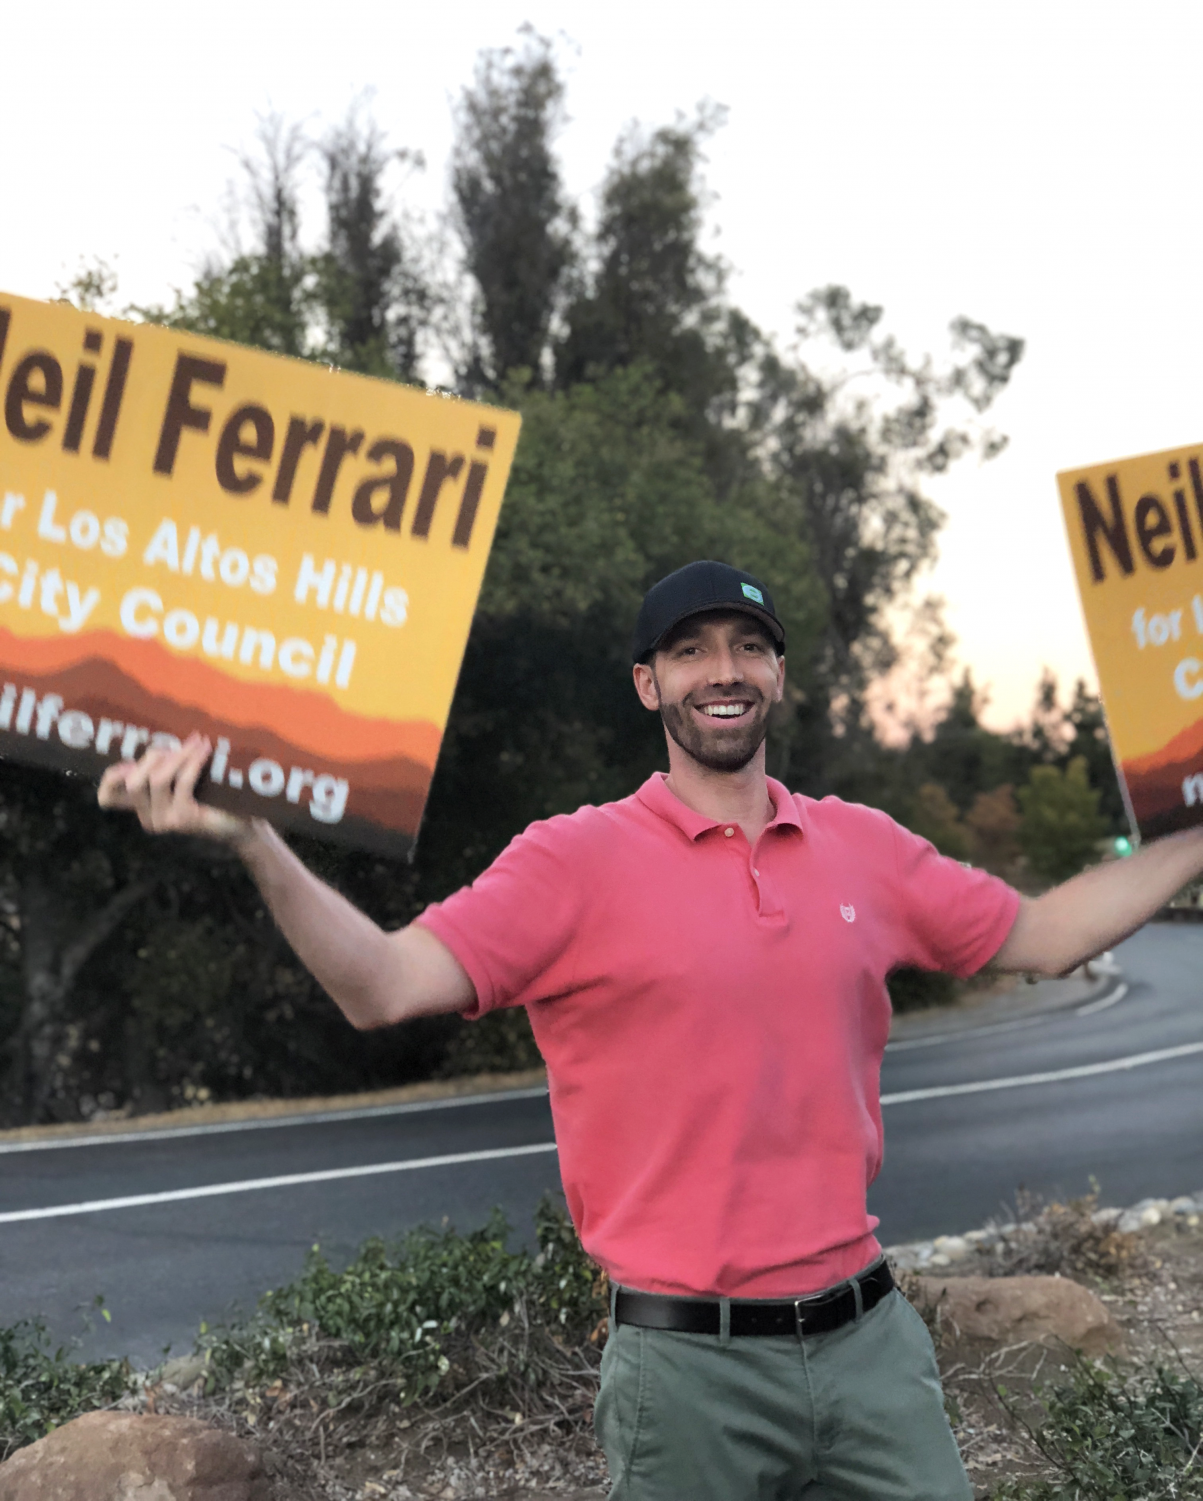 Los+Altos+Hills+Candidate+Neil+Ferrari+stands+on+an+island+dividing+traffic+to+campaign+hours+before+voting+finishes.